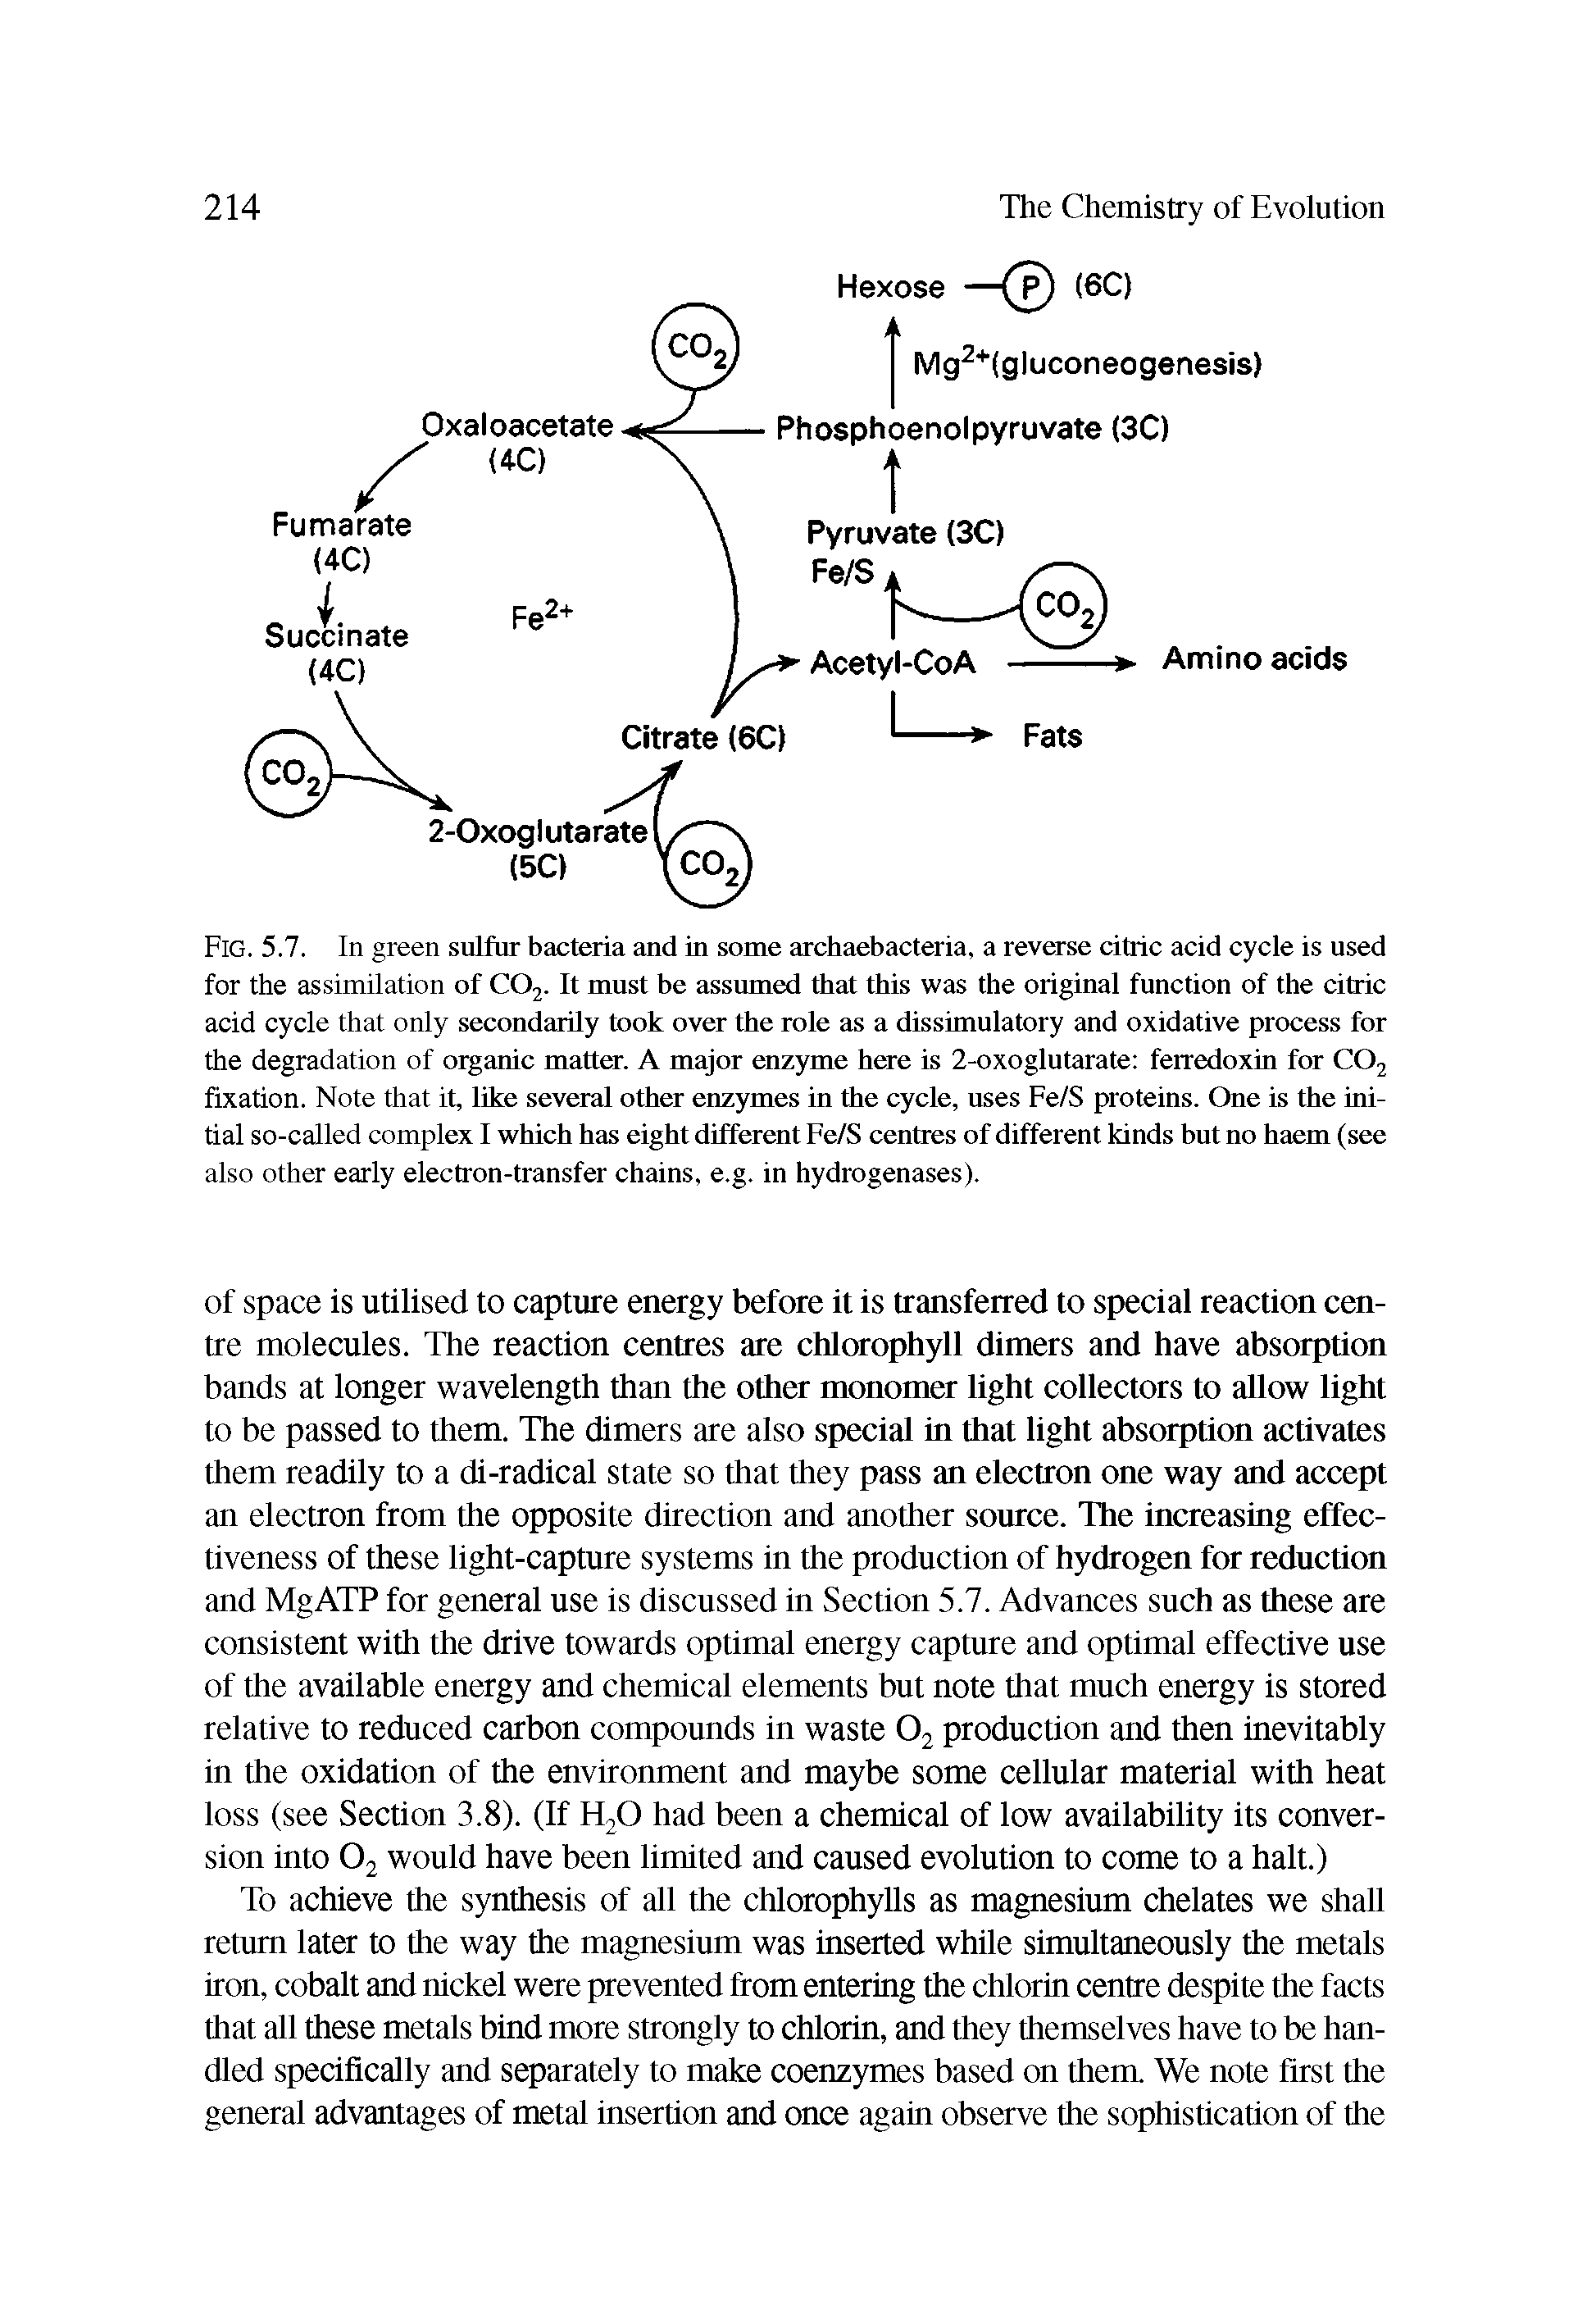 Fig. 5.7. In green sulfur bacteria and in some archaebacteria, a reverse citric acid cycle is used for the assimilation of C02. It must be assumed that this was the original function of the citric acid cycle that only secondarily took over the role as a dissimulatory and oxidative process for the degradation of organic matter. A major enzyme here is 2-oxoglutarate ferredoxin for C02 fixation. Note that it, like several other enzymes in the cycle, uses Fe/S proteins. One is the initial so-called complex I which has eight different Fe/S centres of different kinds but no haem (see also other early electron-transfer chains, e.g. in hydrogenases).